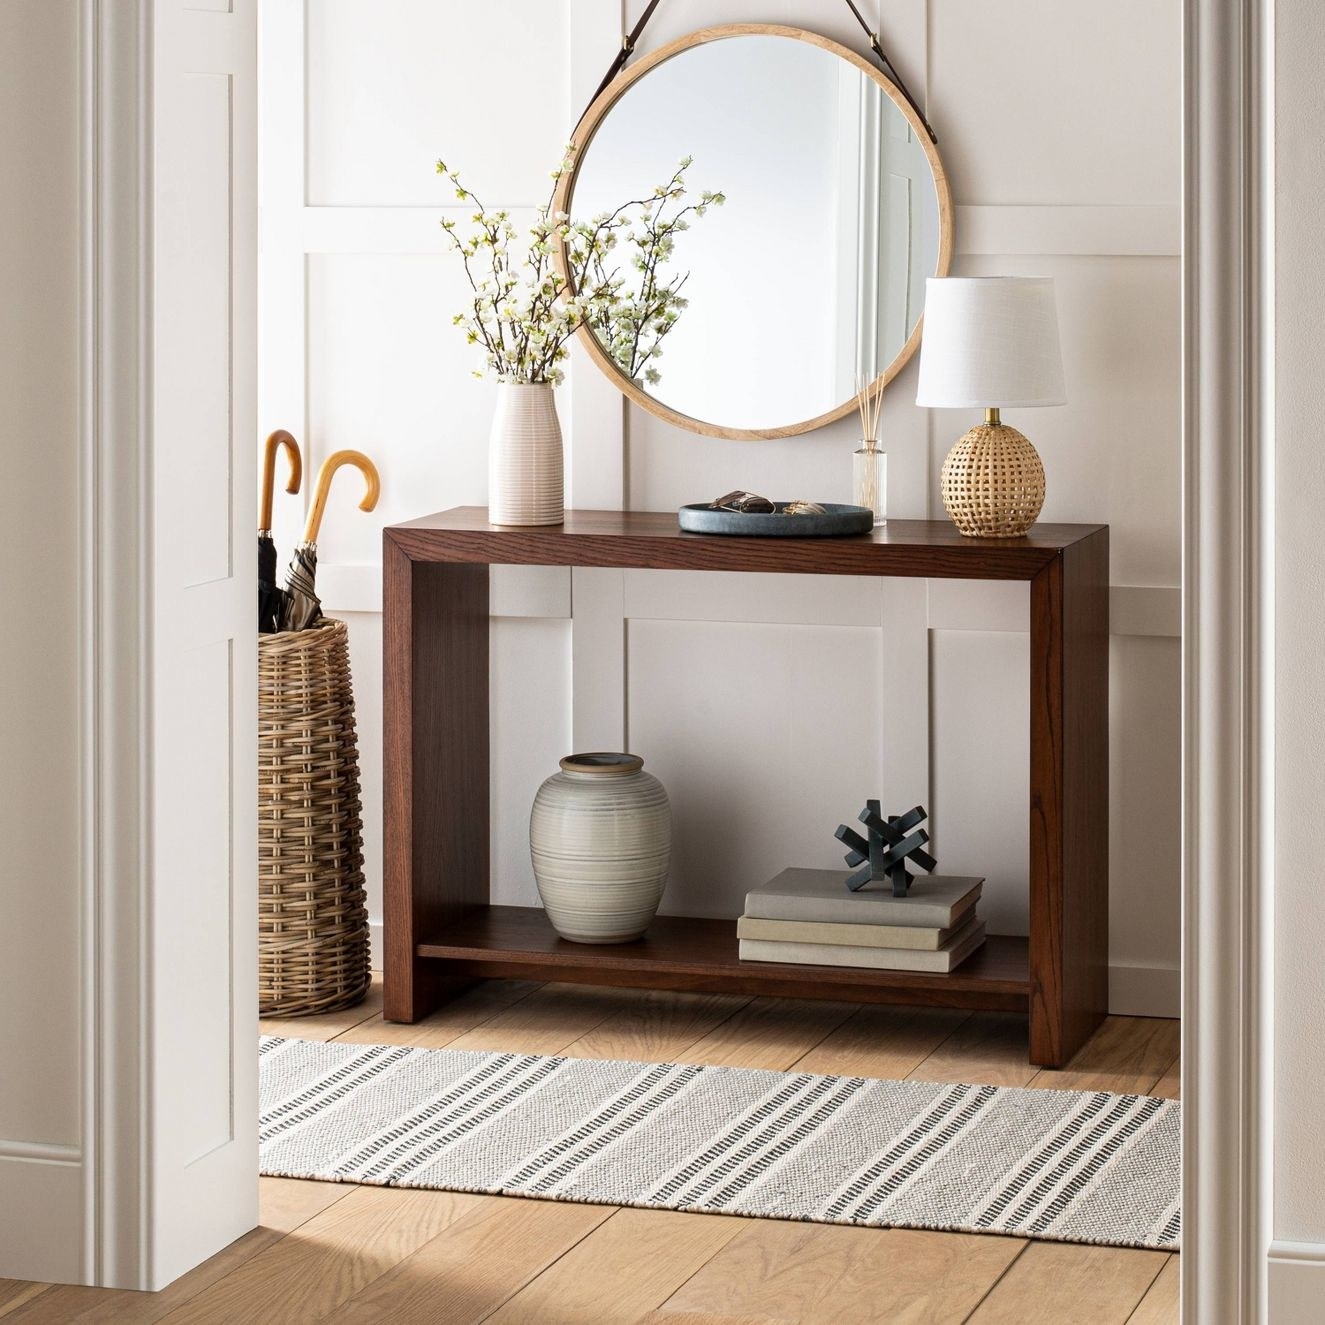 The console table with decor